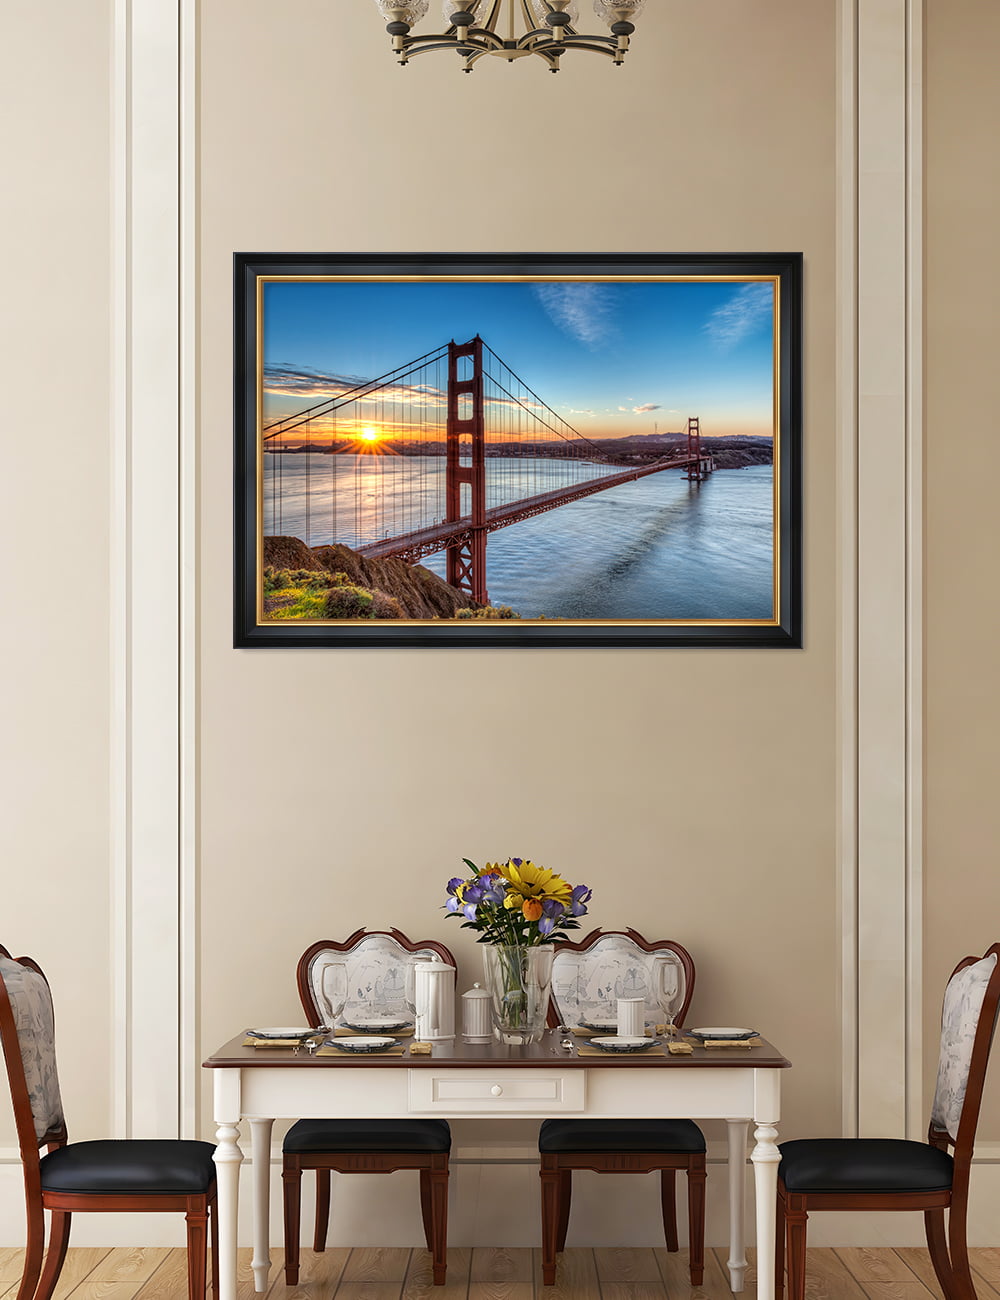 DecorArts Golden Gate Bridge San Francisco Califonia, Giclee Print on  Acid Free Cotton Canvas with Matching Classical Solid Wood Frame. Total  Size w/Frame: 39.25x27.25